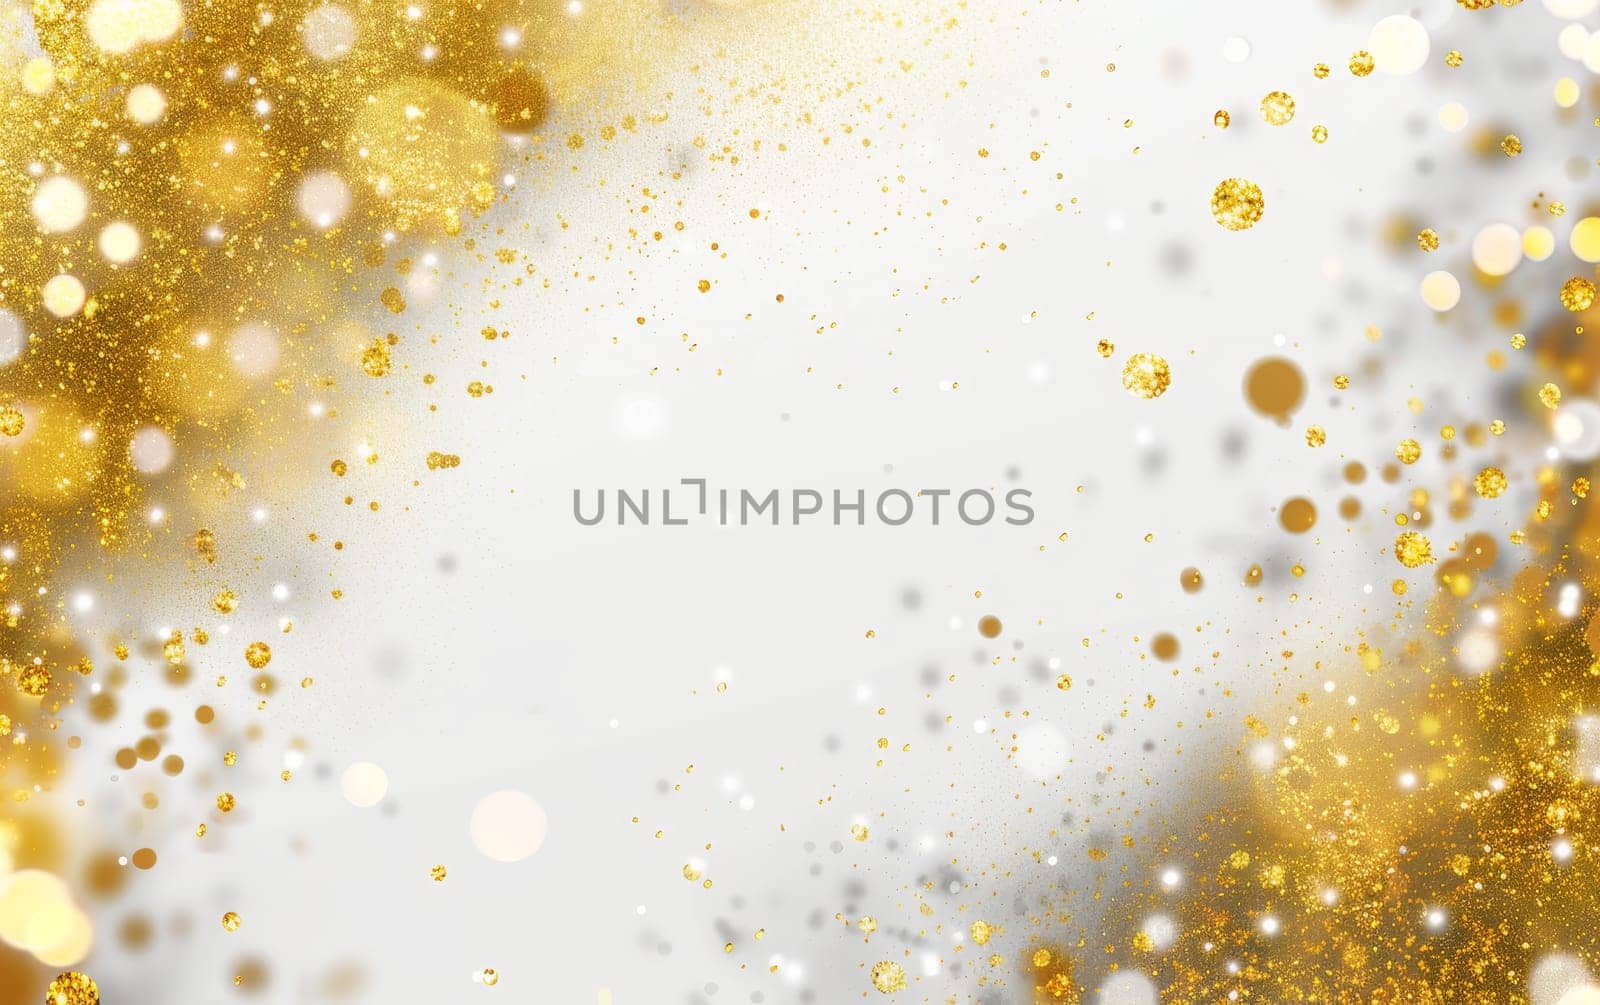 Glistening gold particles fall like snowflakes in this enchanting winter background. The image captures the essence of a luxurious holiday season